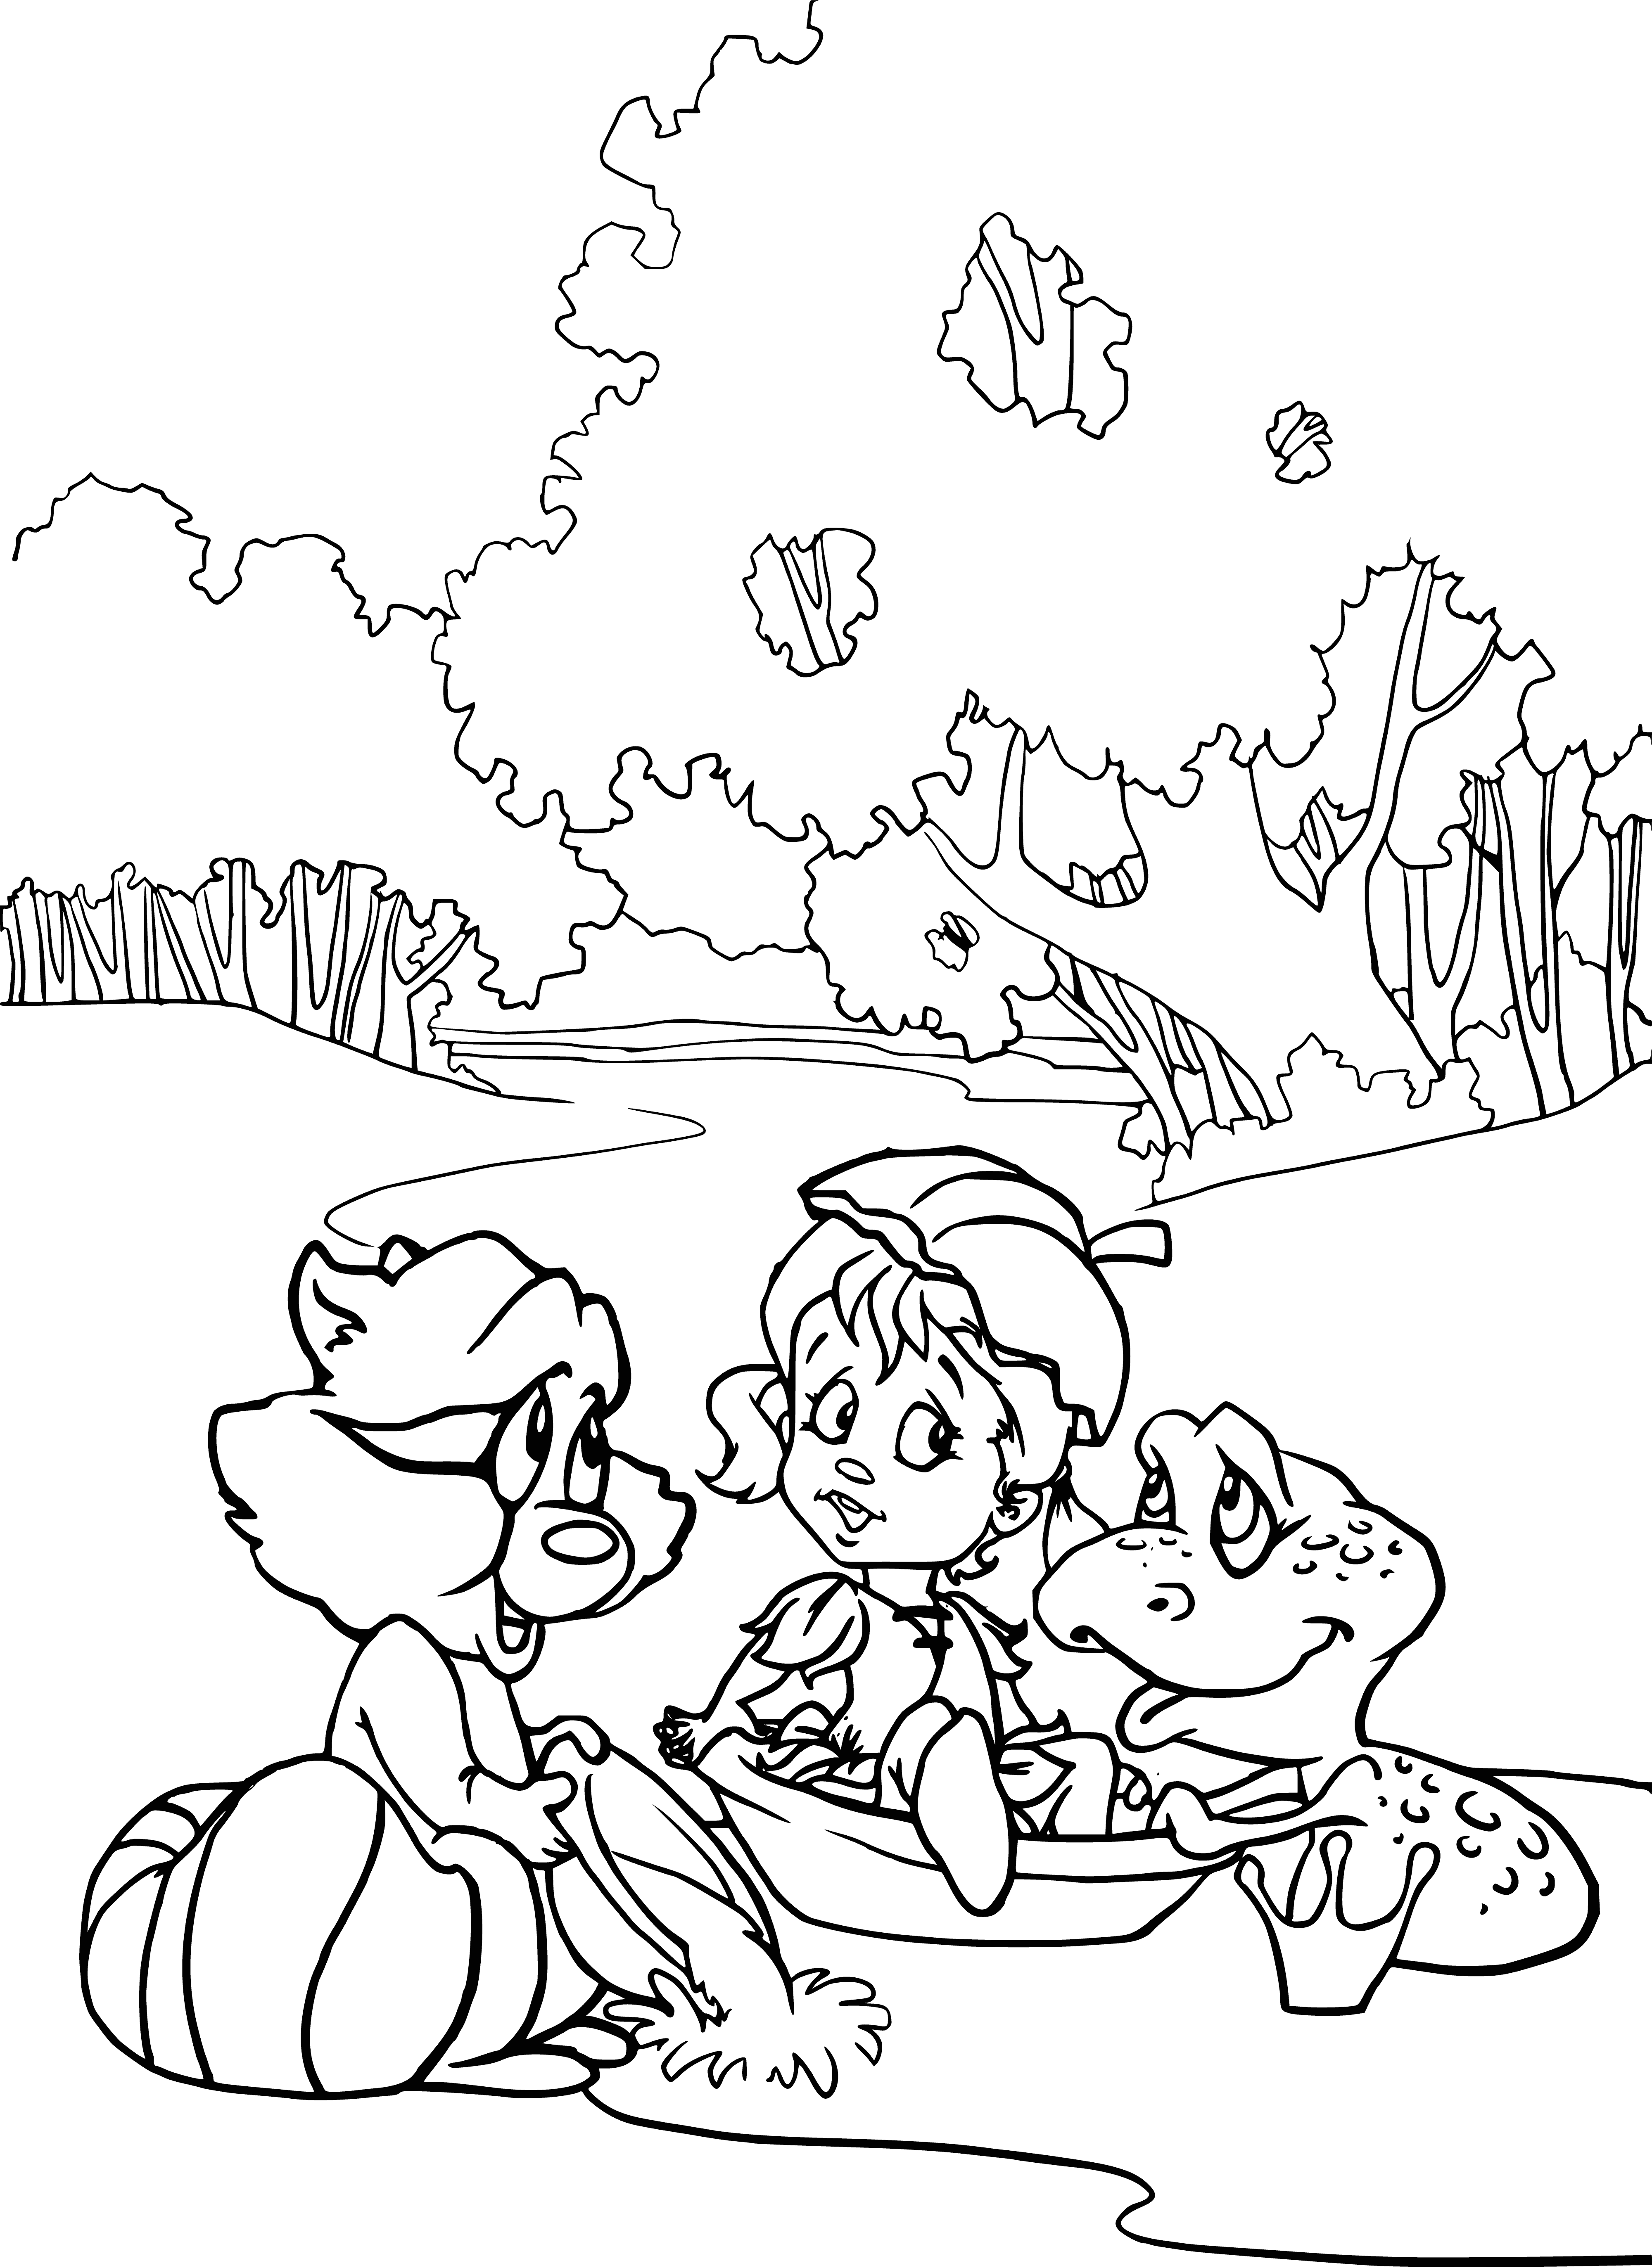 coloring page: 3 friends are happy & waving: Oreshenka w/teddy, Kvaki left, & 1 to the right. #madeformakebelieve